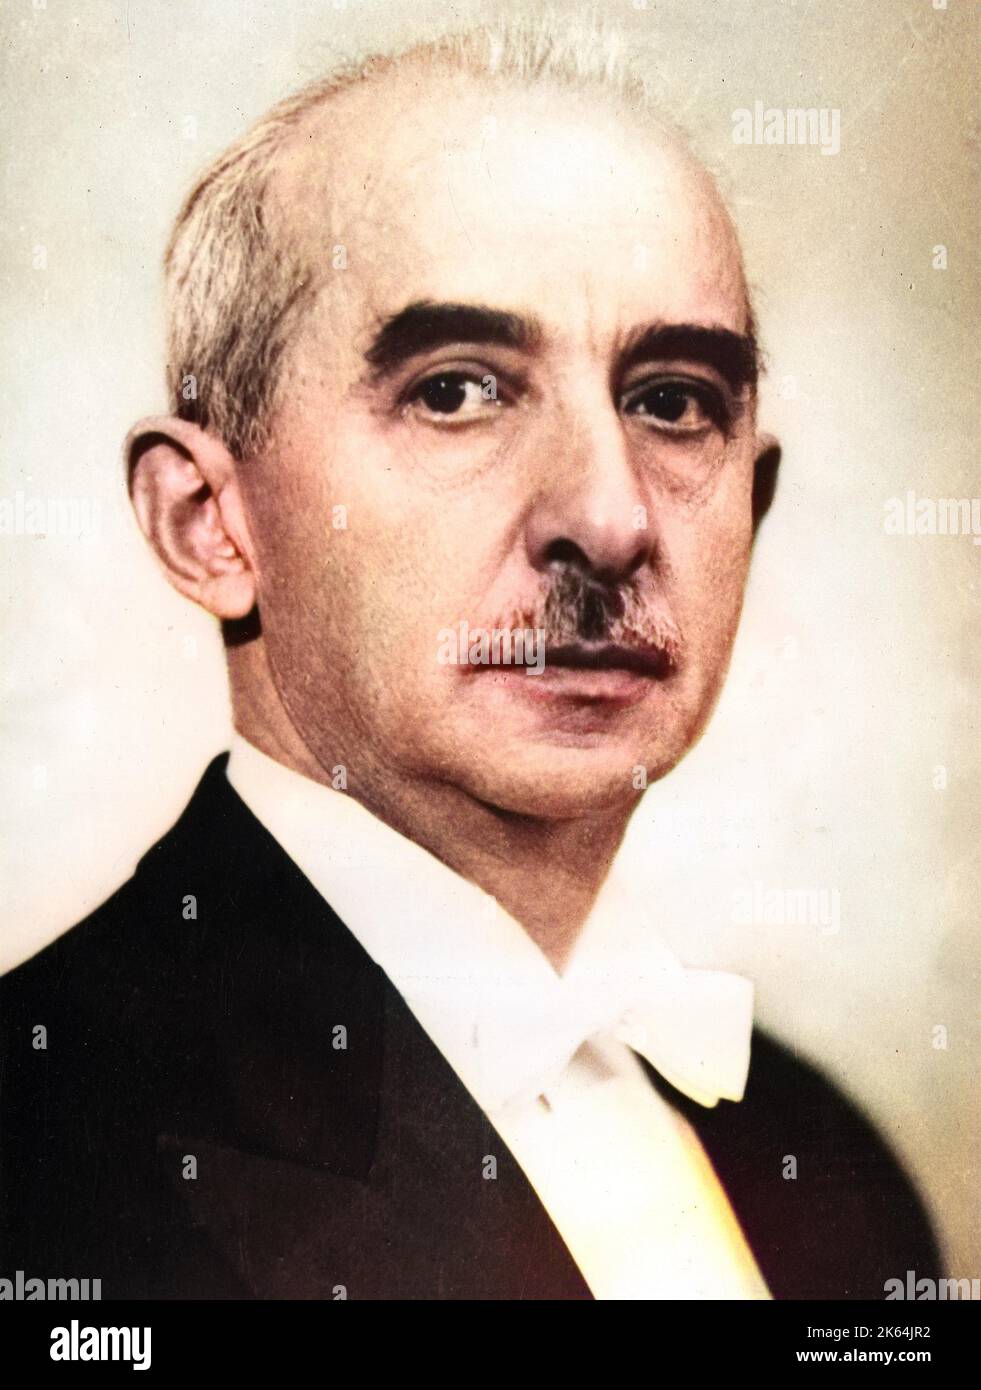 Mustafa Ismet Inonu (1884-1973) - Turkish Army General, Prime Minister and the second President of the Republic of Turkey. He is widely referred to as 'Milli Sef' (National Chief), a title he bestowed upon himself when he was elected as the President of Turkey in 1938.     Date: circa 1940 Stock Photo